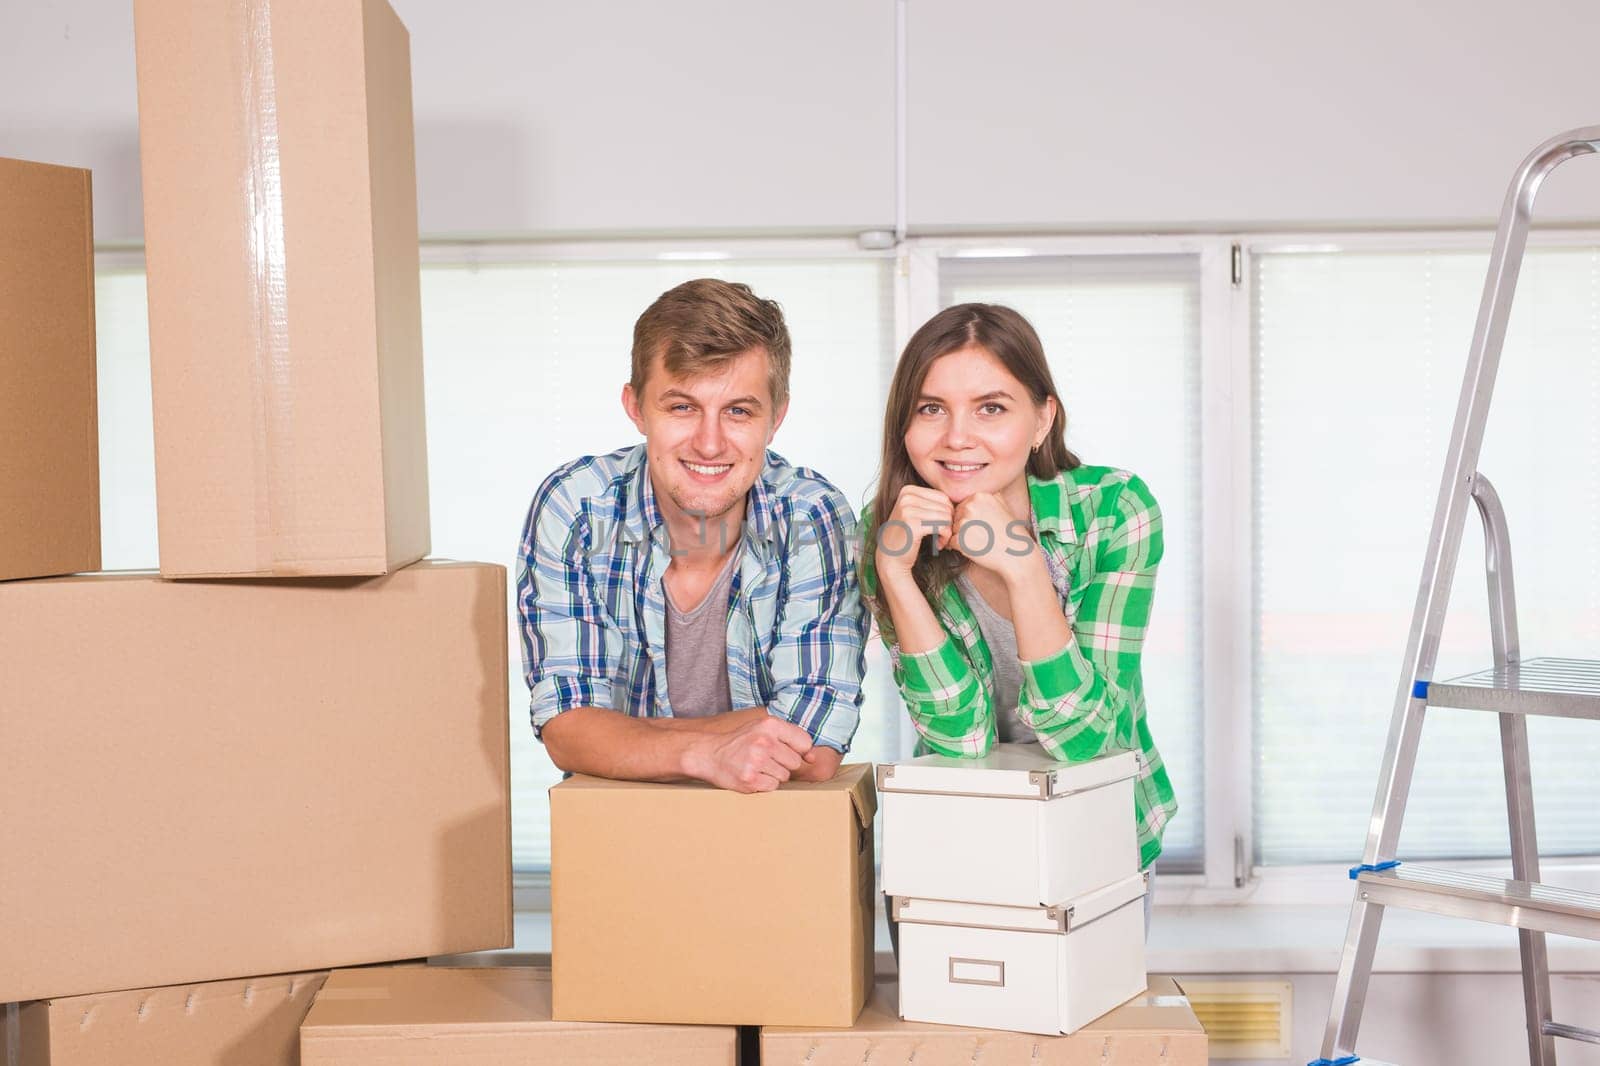 home, people, moving and real estate concept - happy couple with cardboard boxes at new home by Satura86